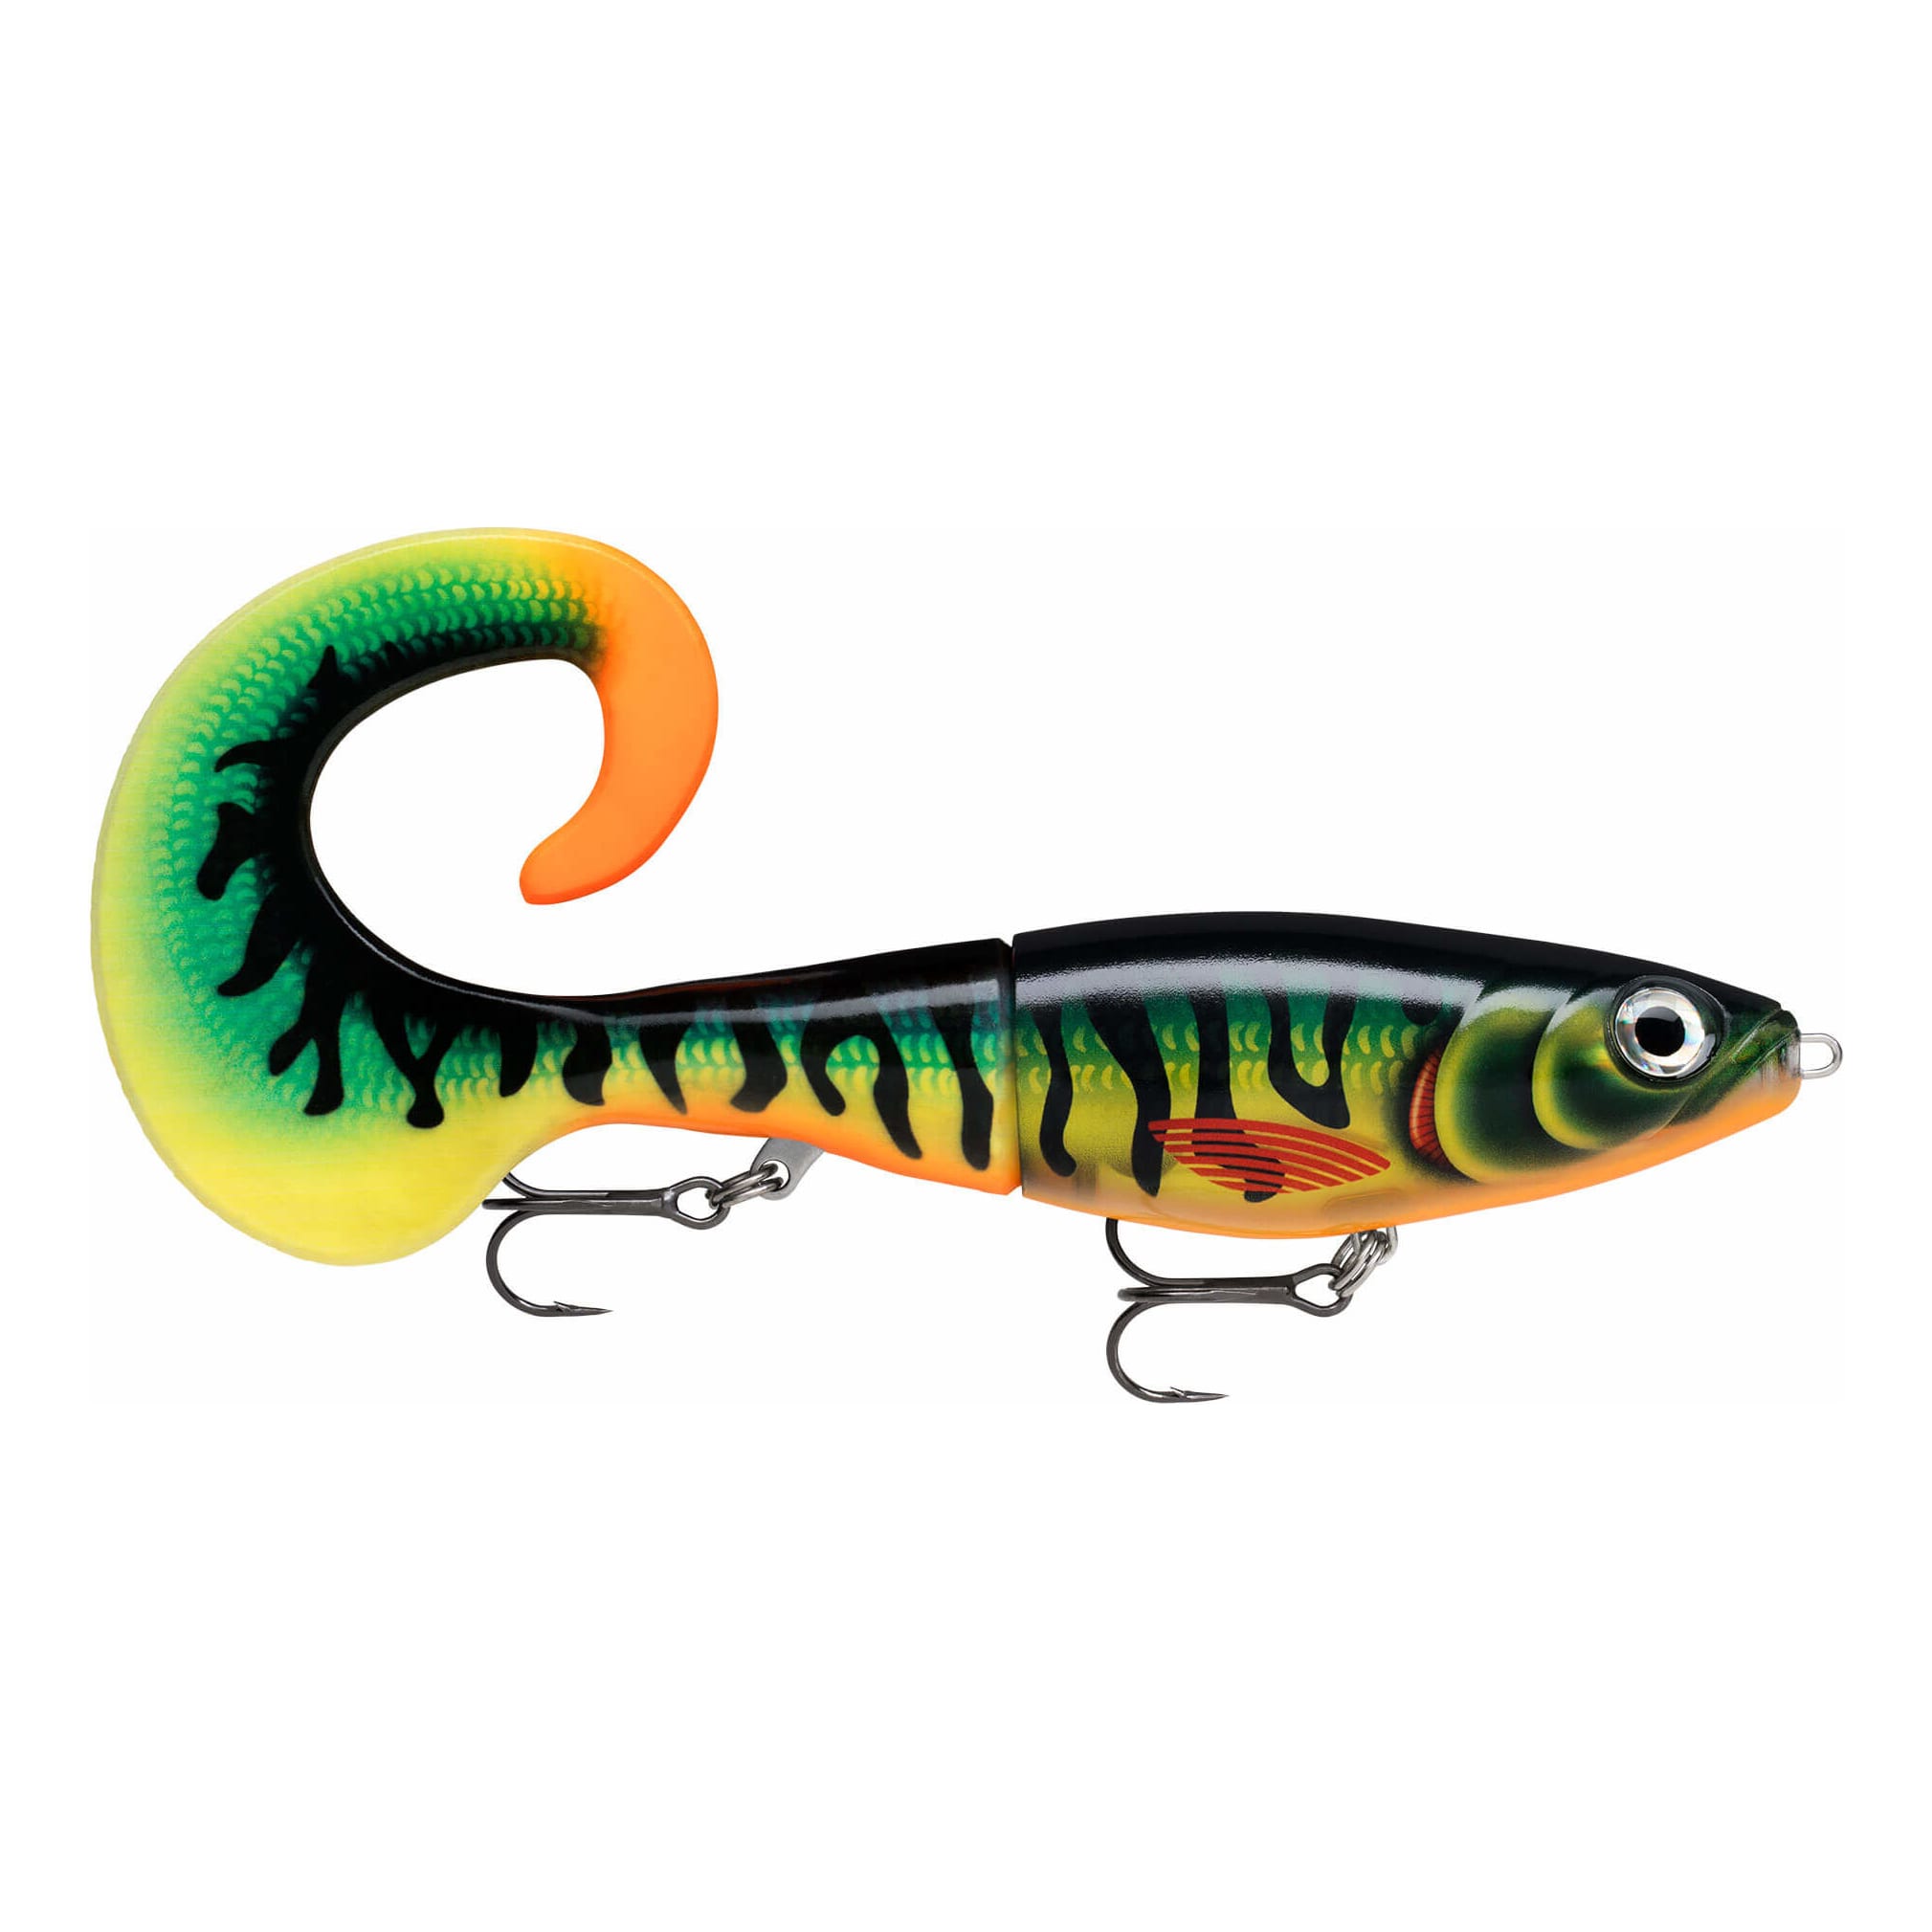 Baits Lures KINGDOM Fishing Multi Jointed 120mm Floating Surface Hard  Minnow Swimbait Trout Wobblers Soft Ttail Lure 230912 From Hu09, $11.52